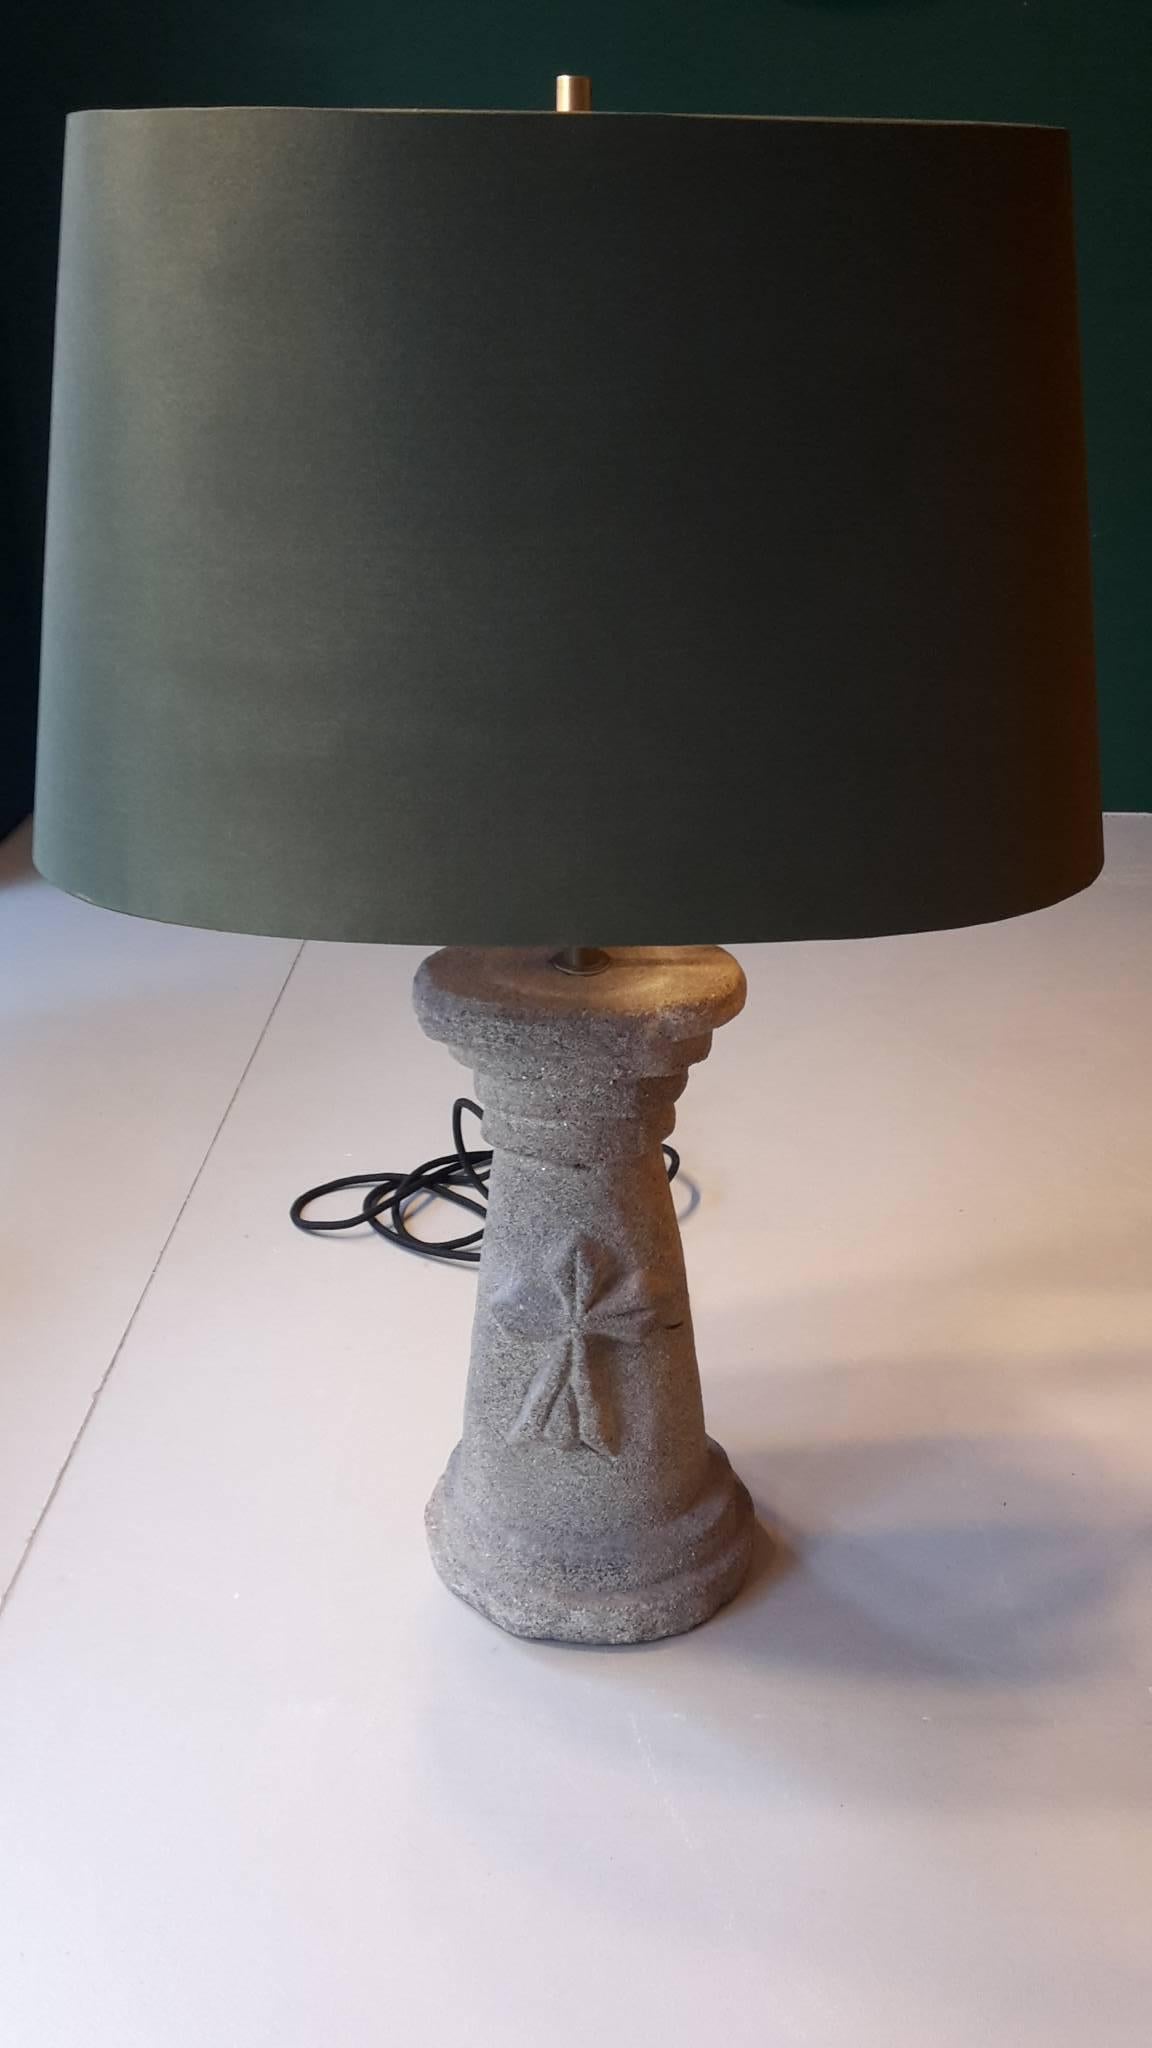 20th Century French table lamp with a foot made of carved stone with a rich grainy surface.